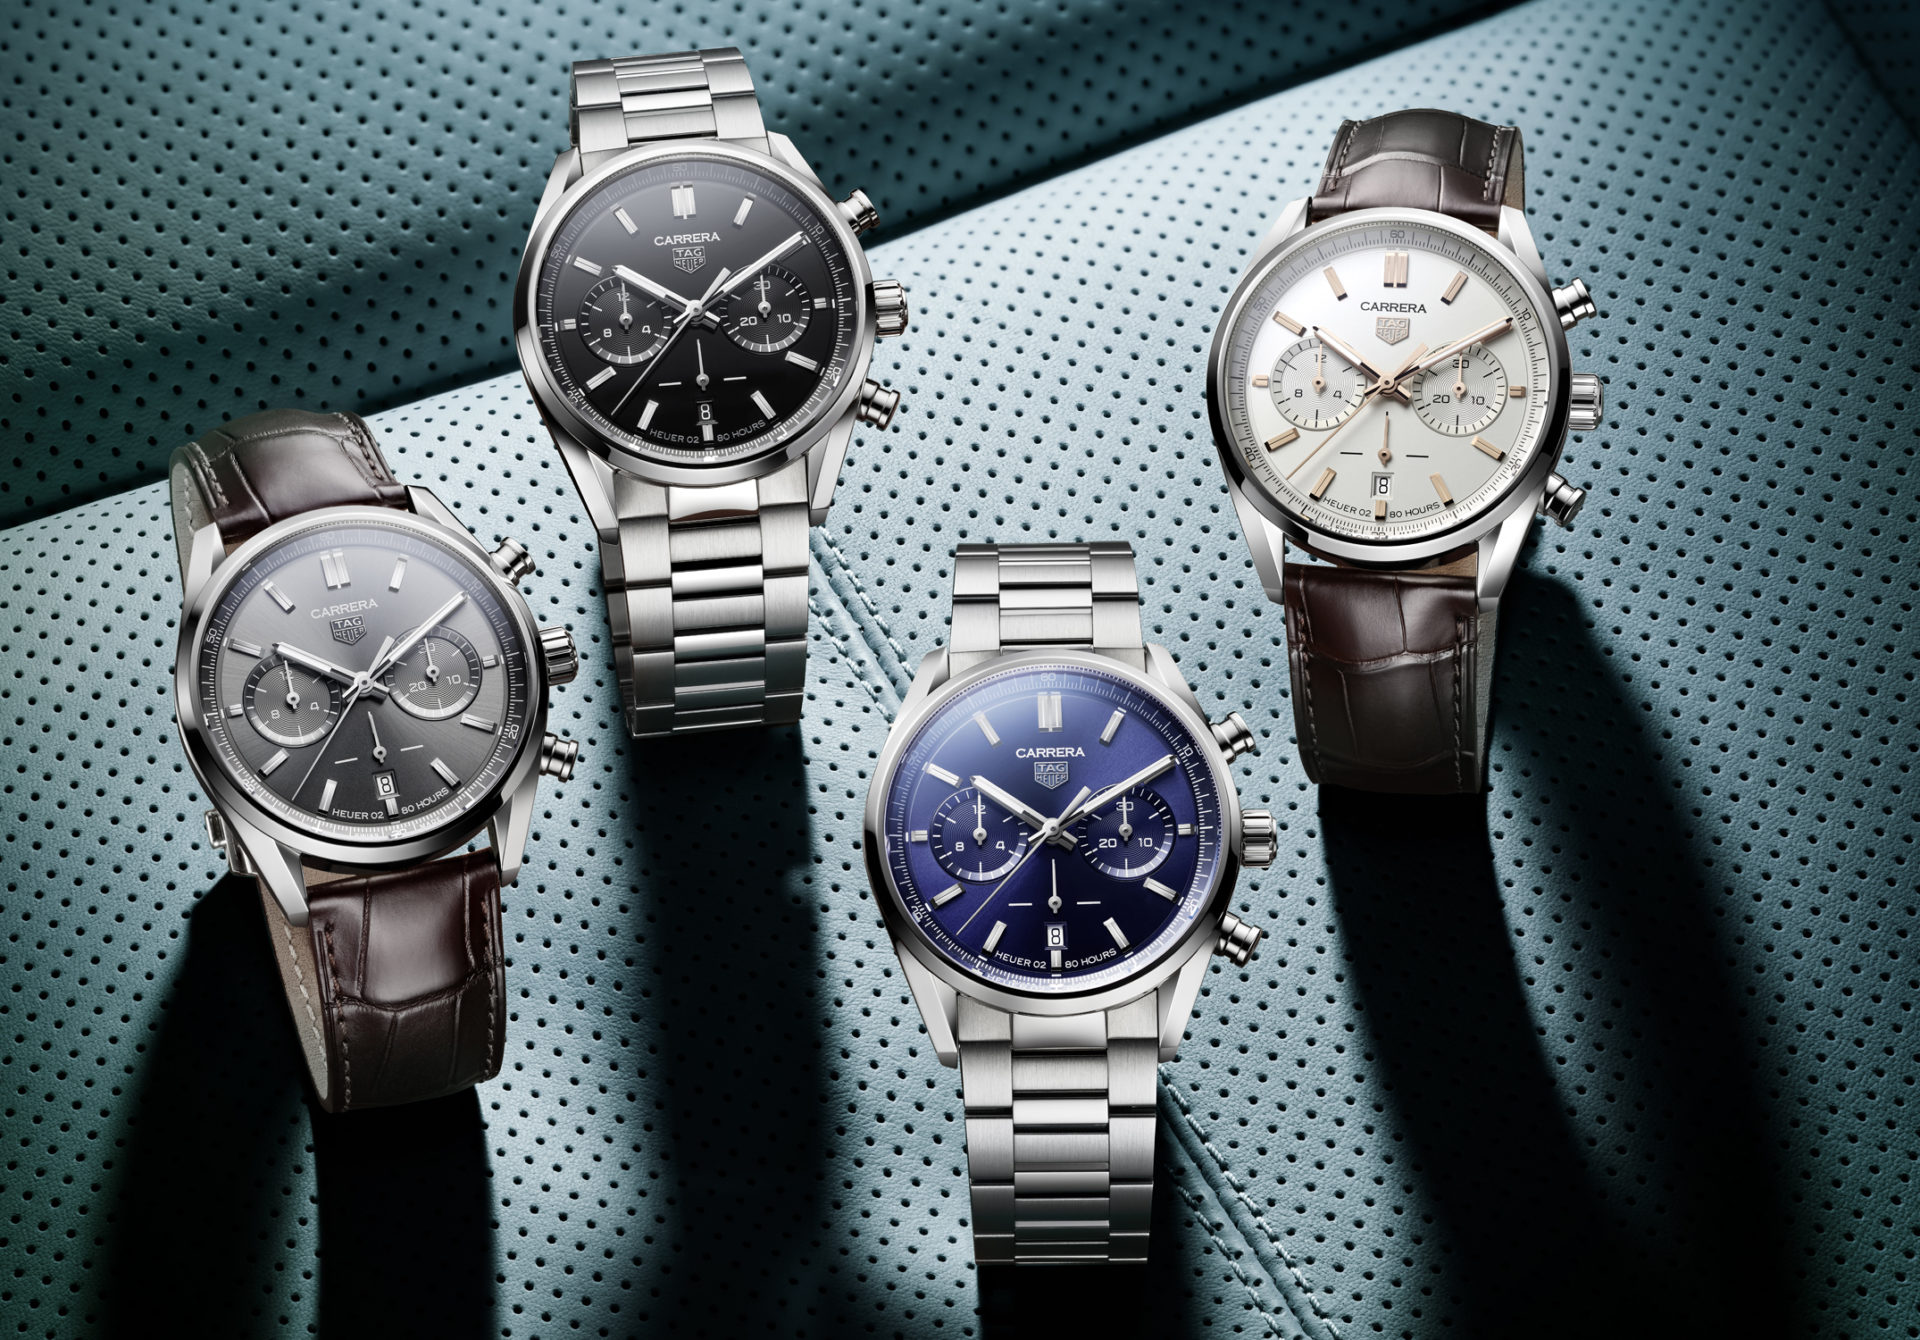 Tag heuer chrono elegance family picture